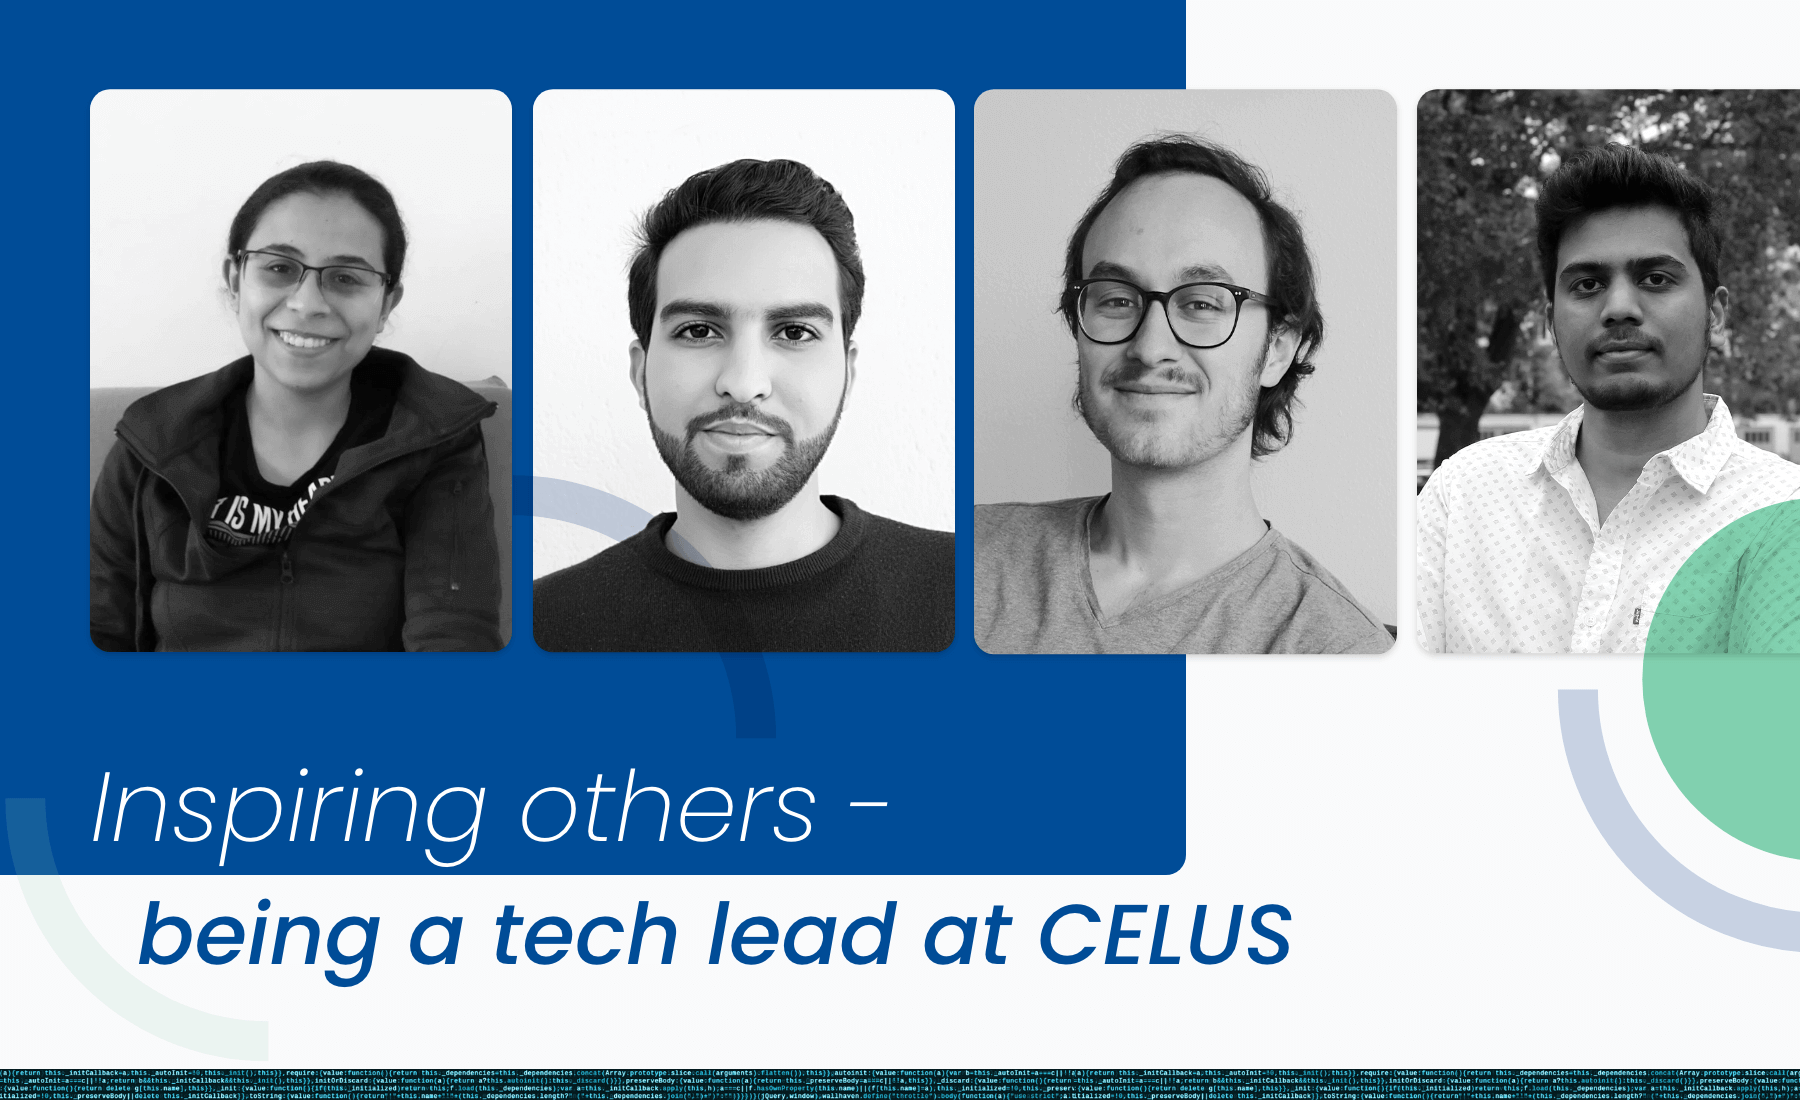 Inspiring others - being a tech lead at CELUS